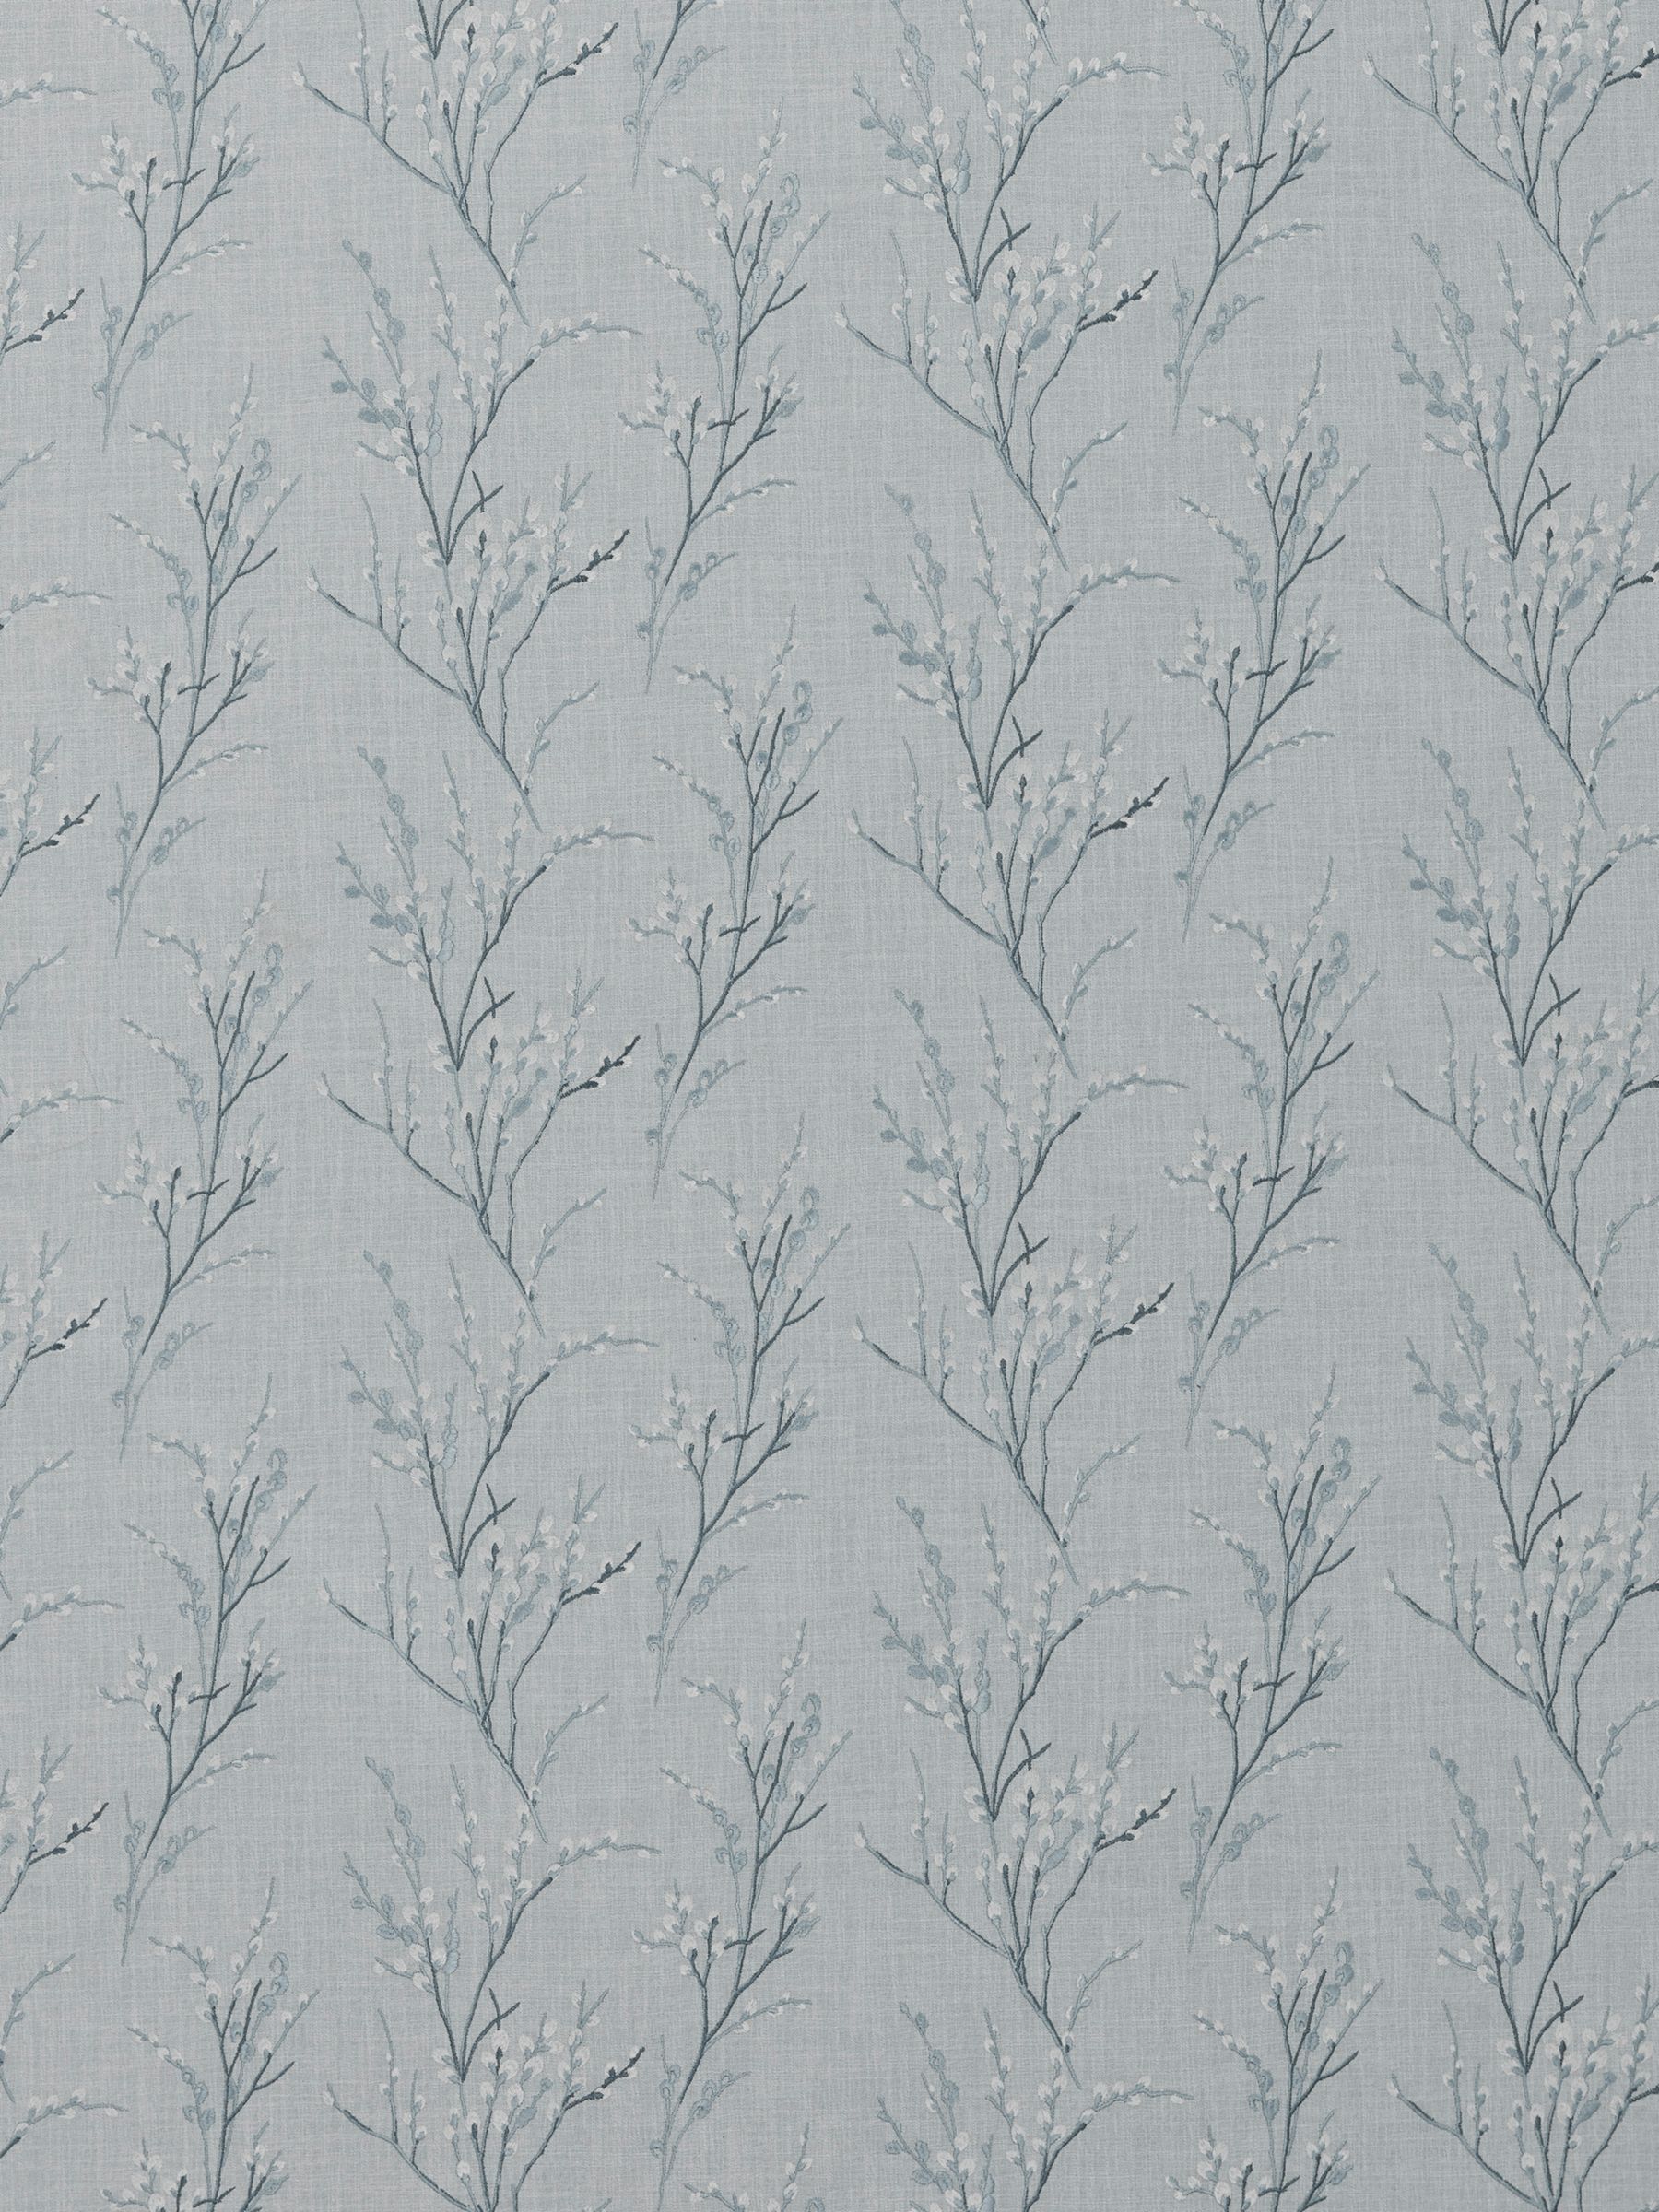 Laura Ashley Pussy Willow Embroidered Furnishing Fabric, Seaspray